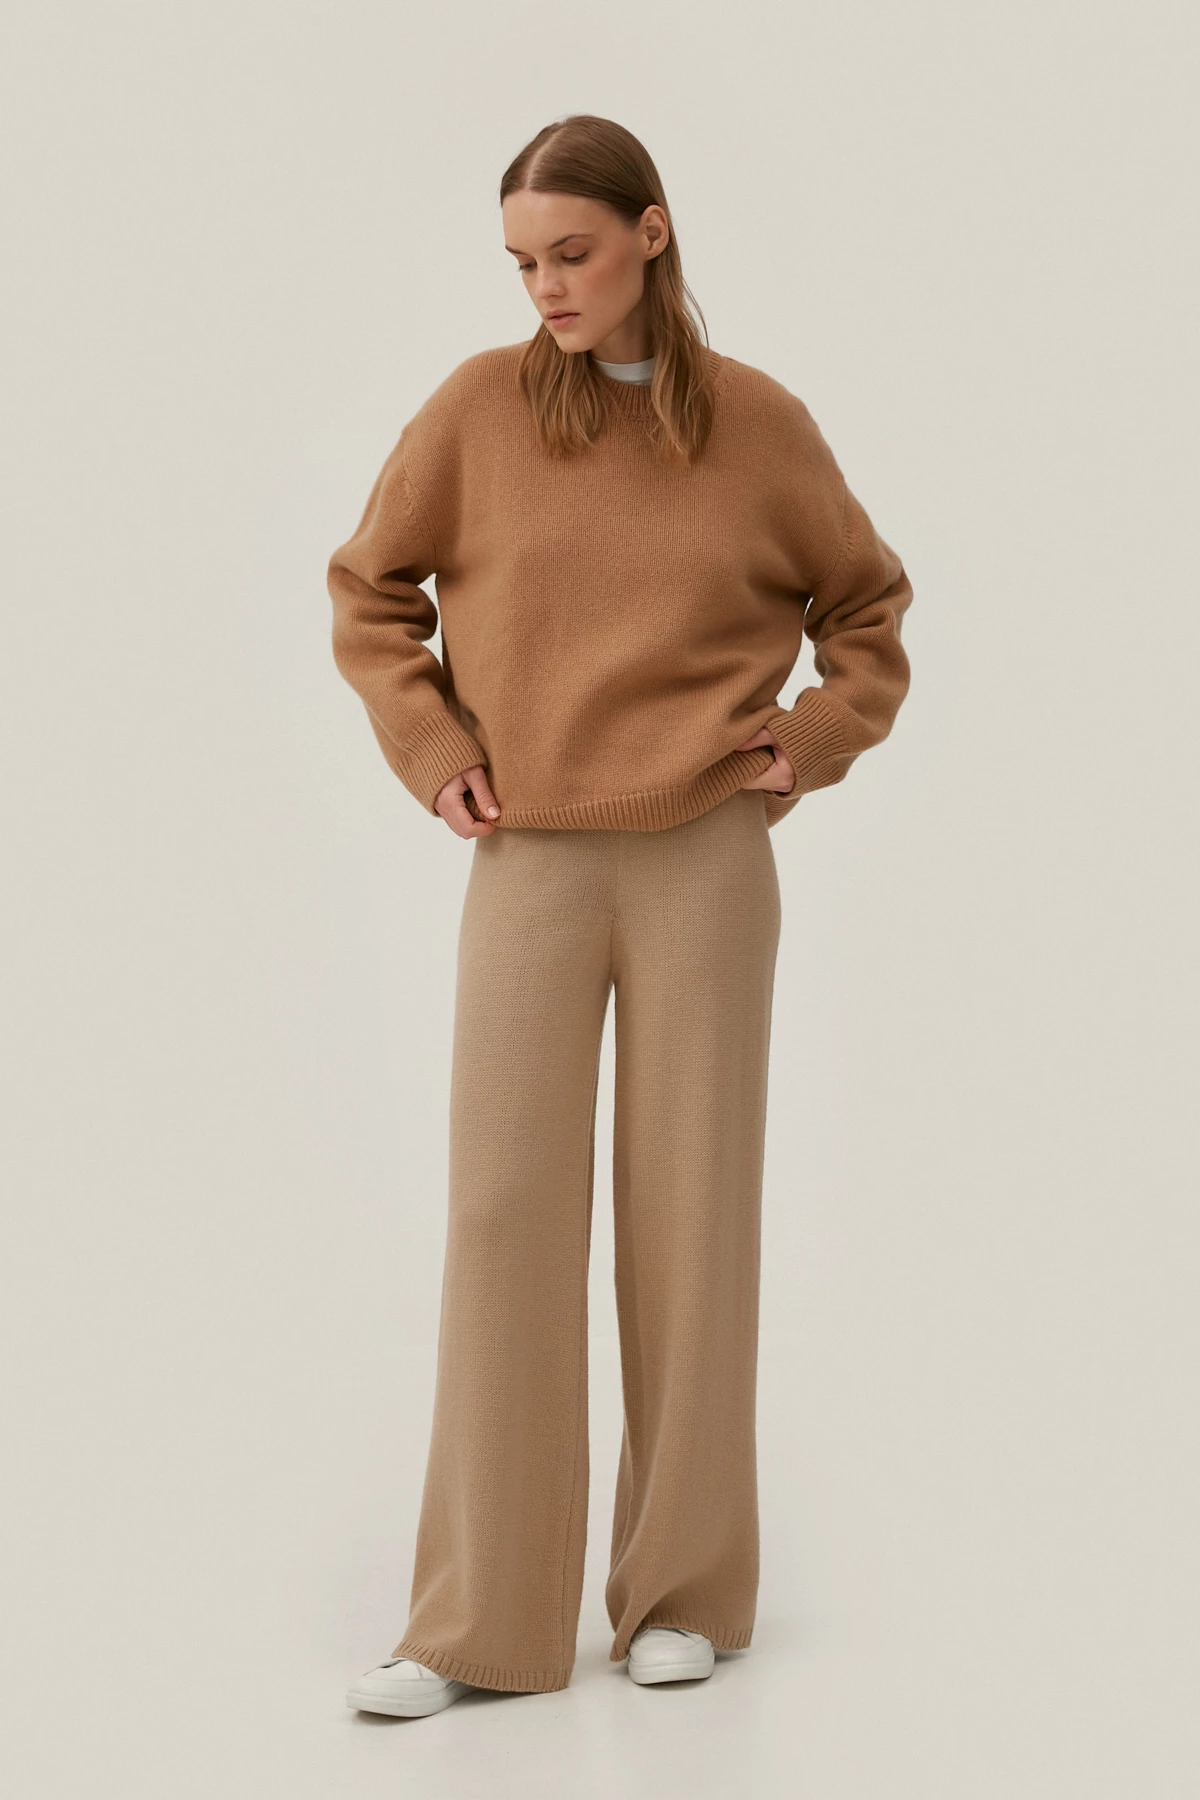 Beige knitted elongated pants with merino wool, photo 2